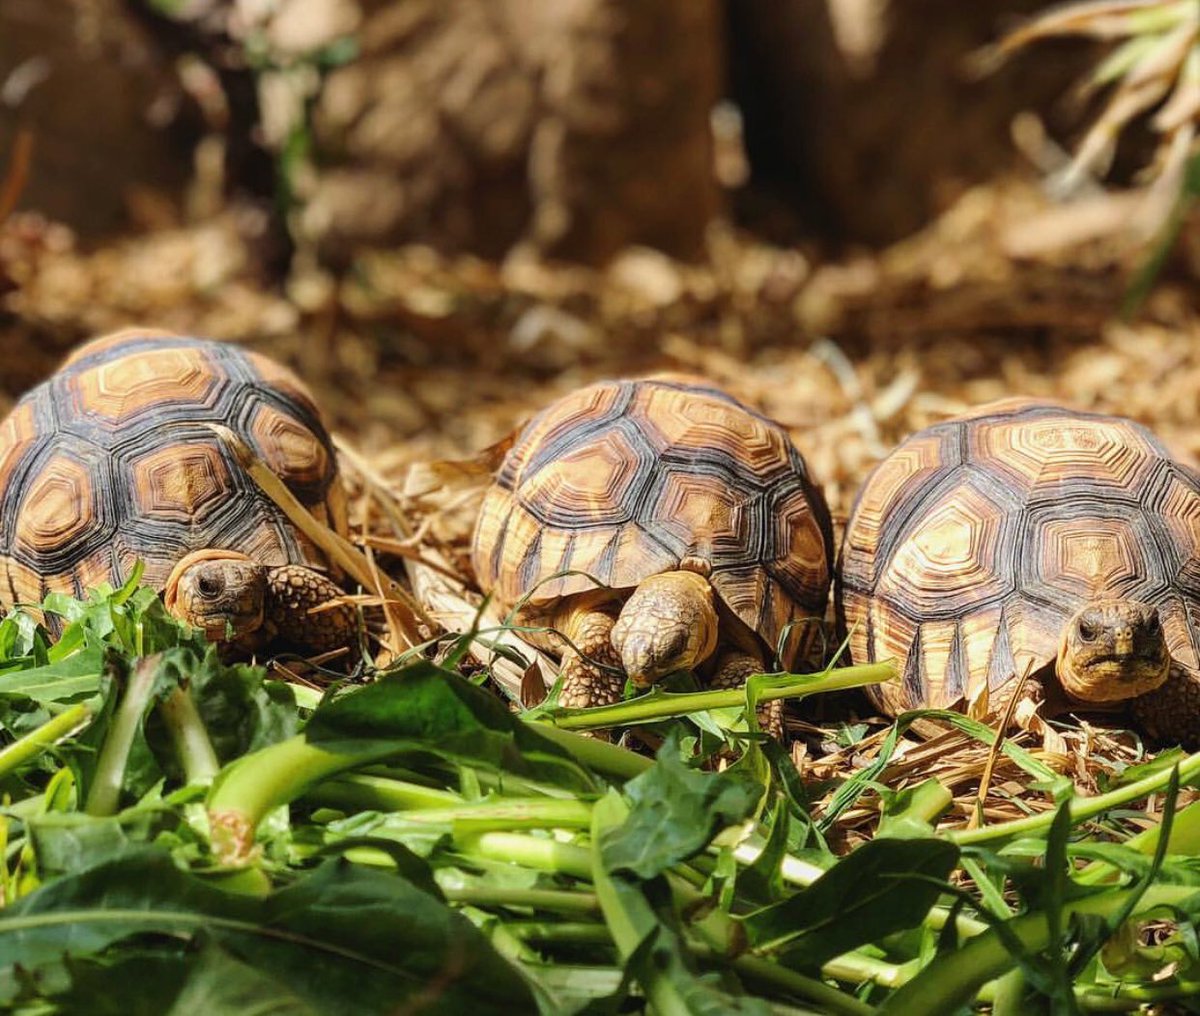 Want to know the other top 50 most endangered turtles and tortoises? 